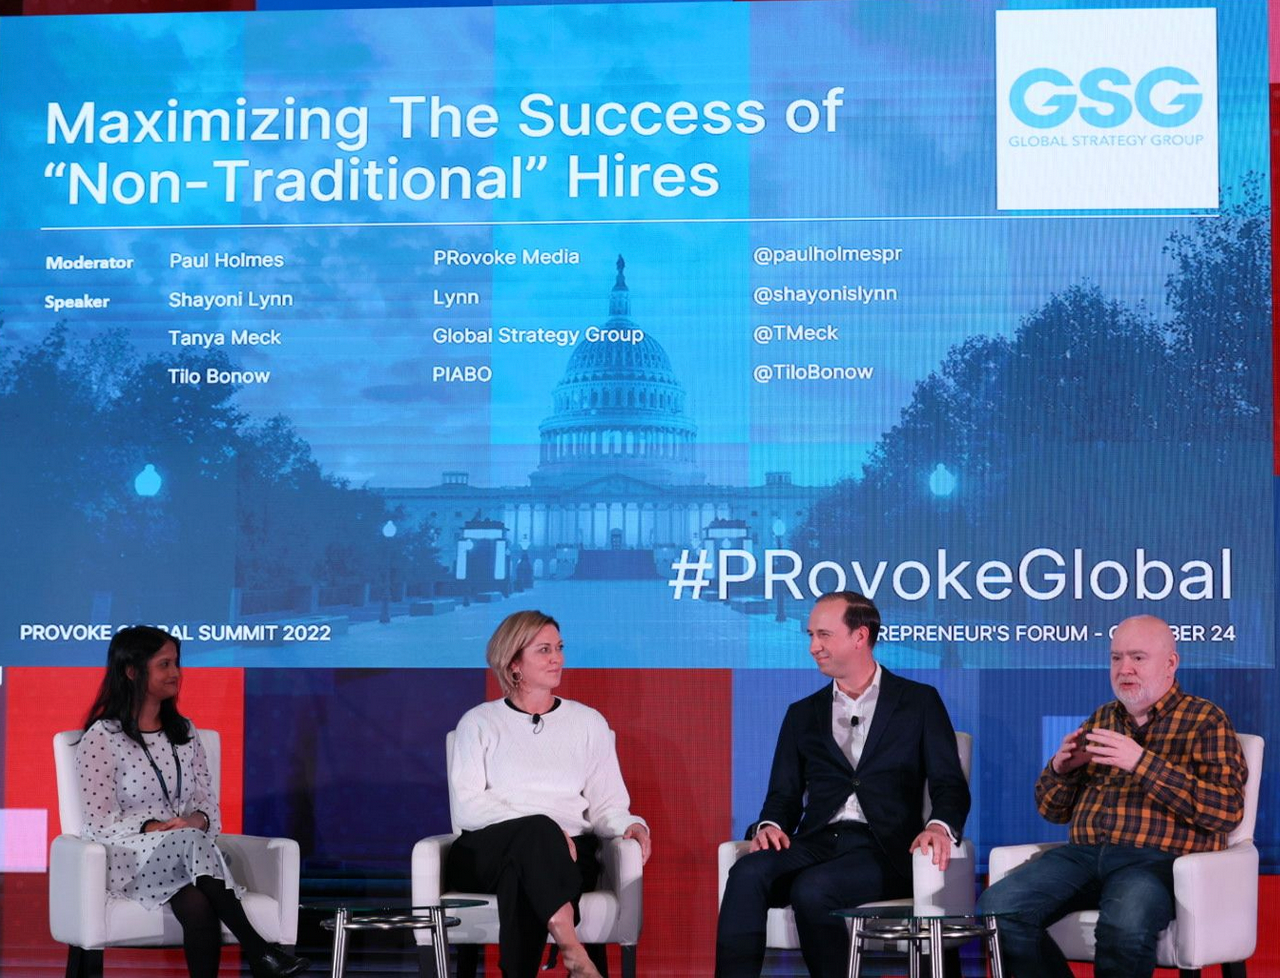 PRovokeGlobal: "We Are Looking For Effort, Enthusiasm & How They Respond To Feedback"